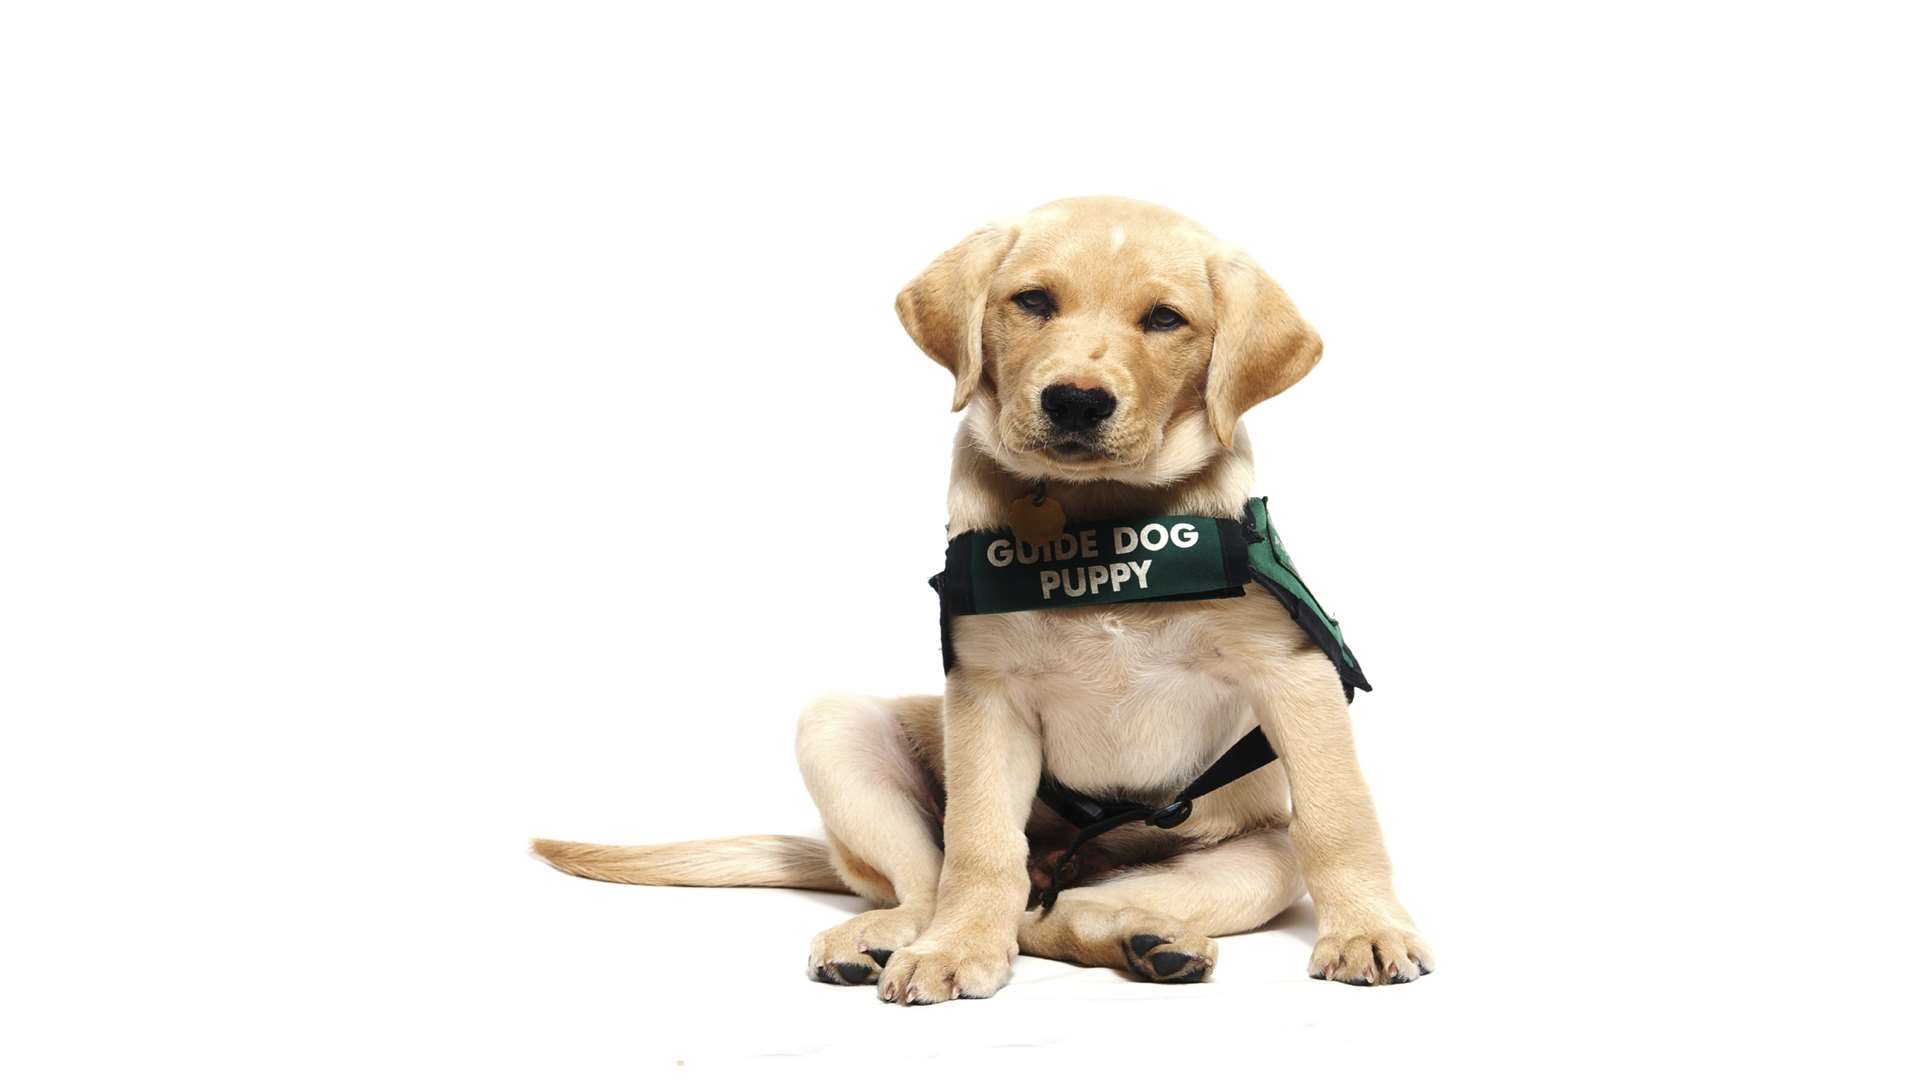 Specsavers will be raising money for Guide Dog Week